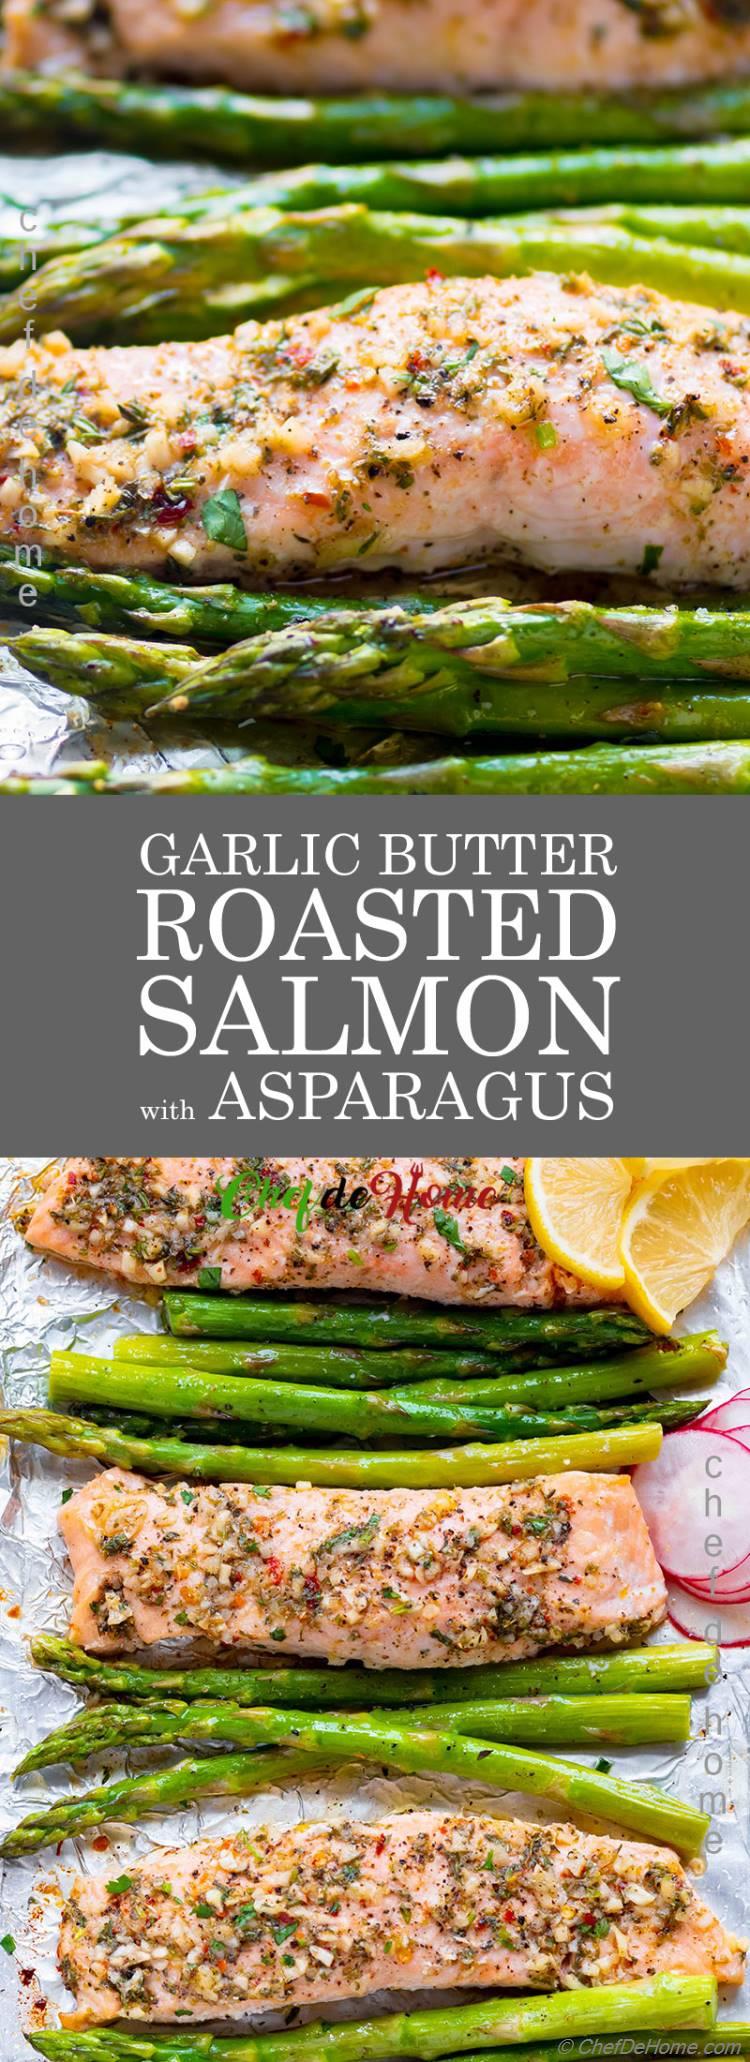 Garlic Butter Roasted Salmon with Asparagus 